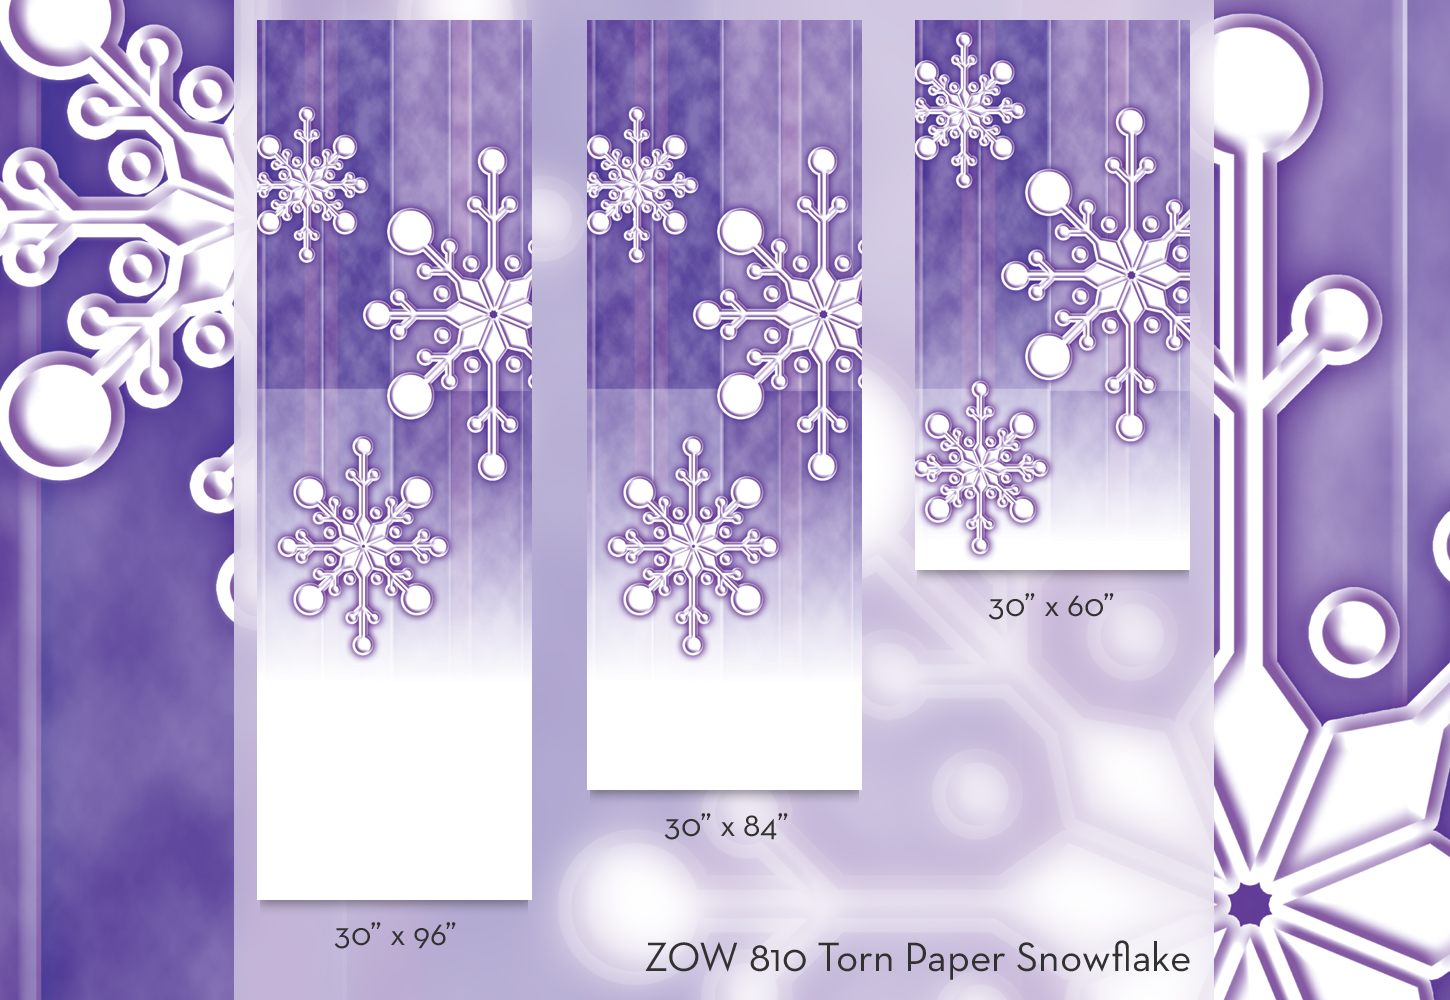 ZOW 810 Torn Paper Snowflake